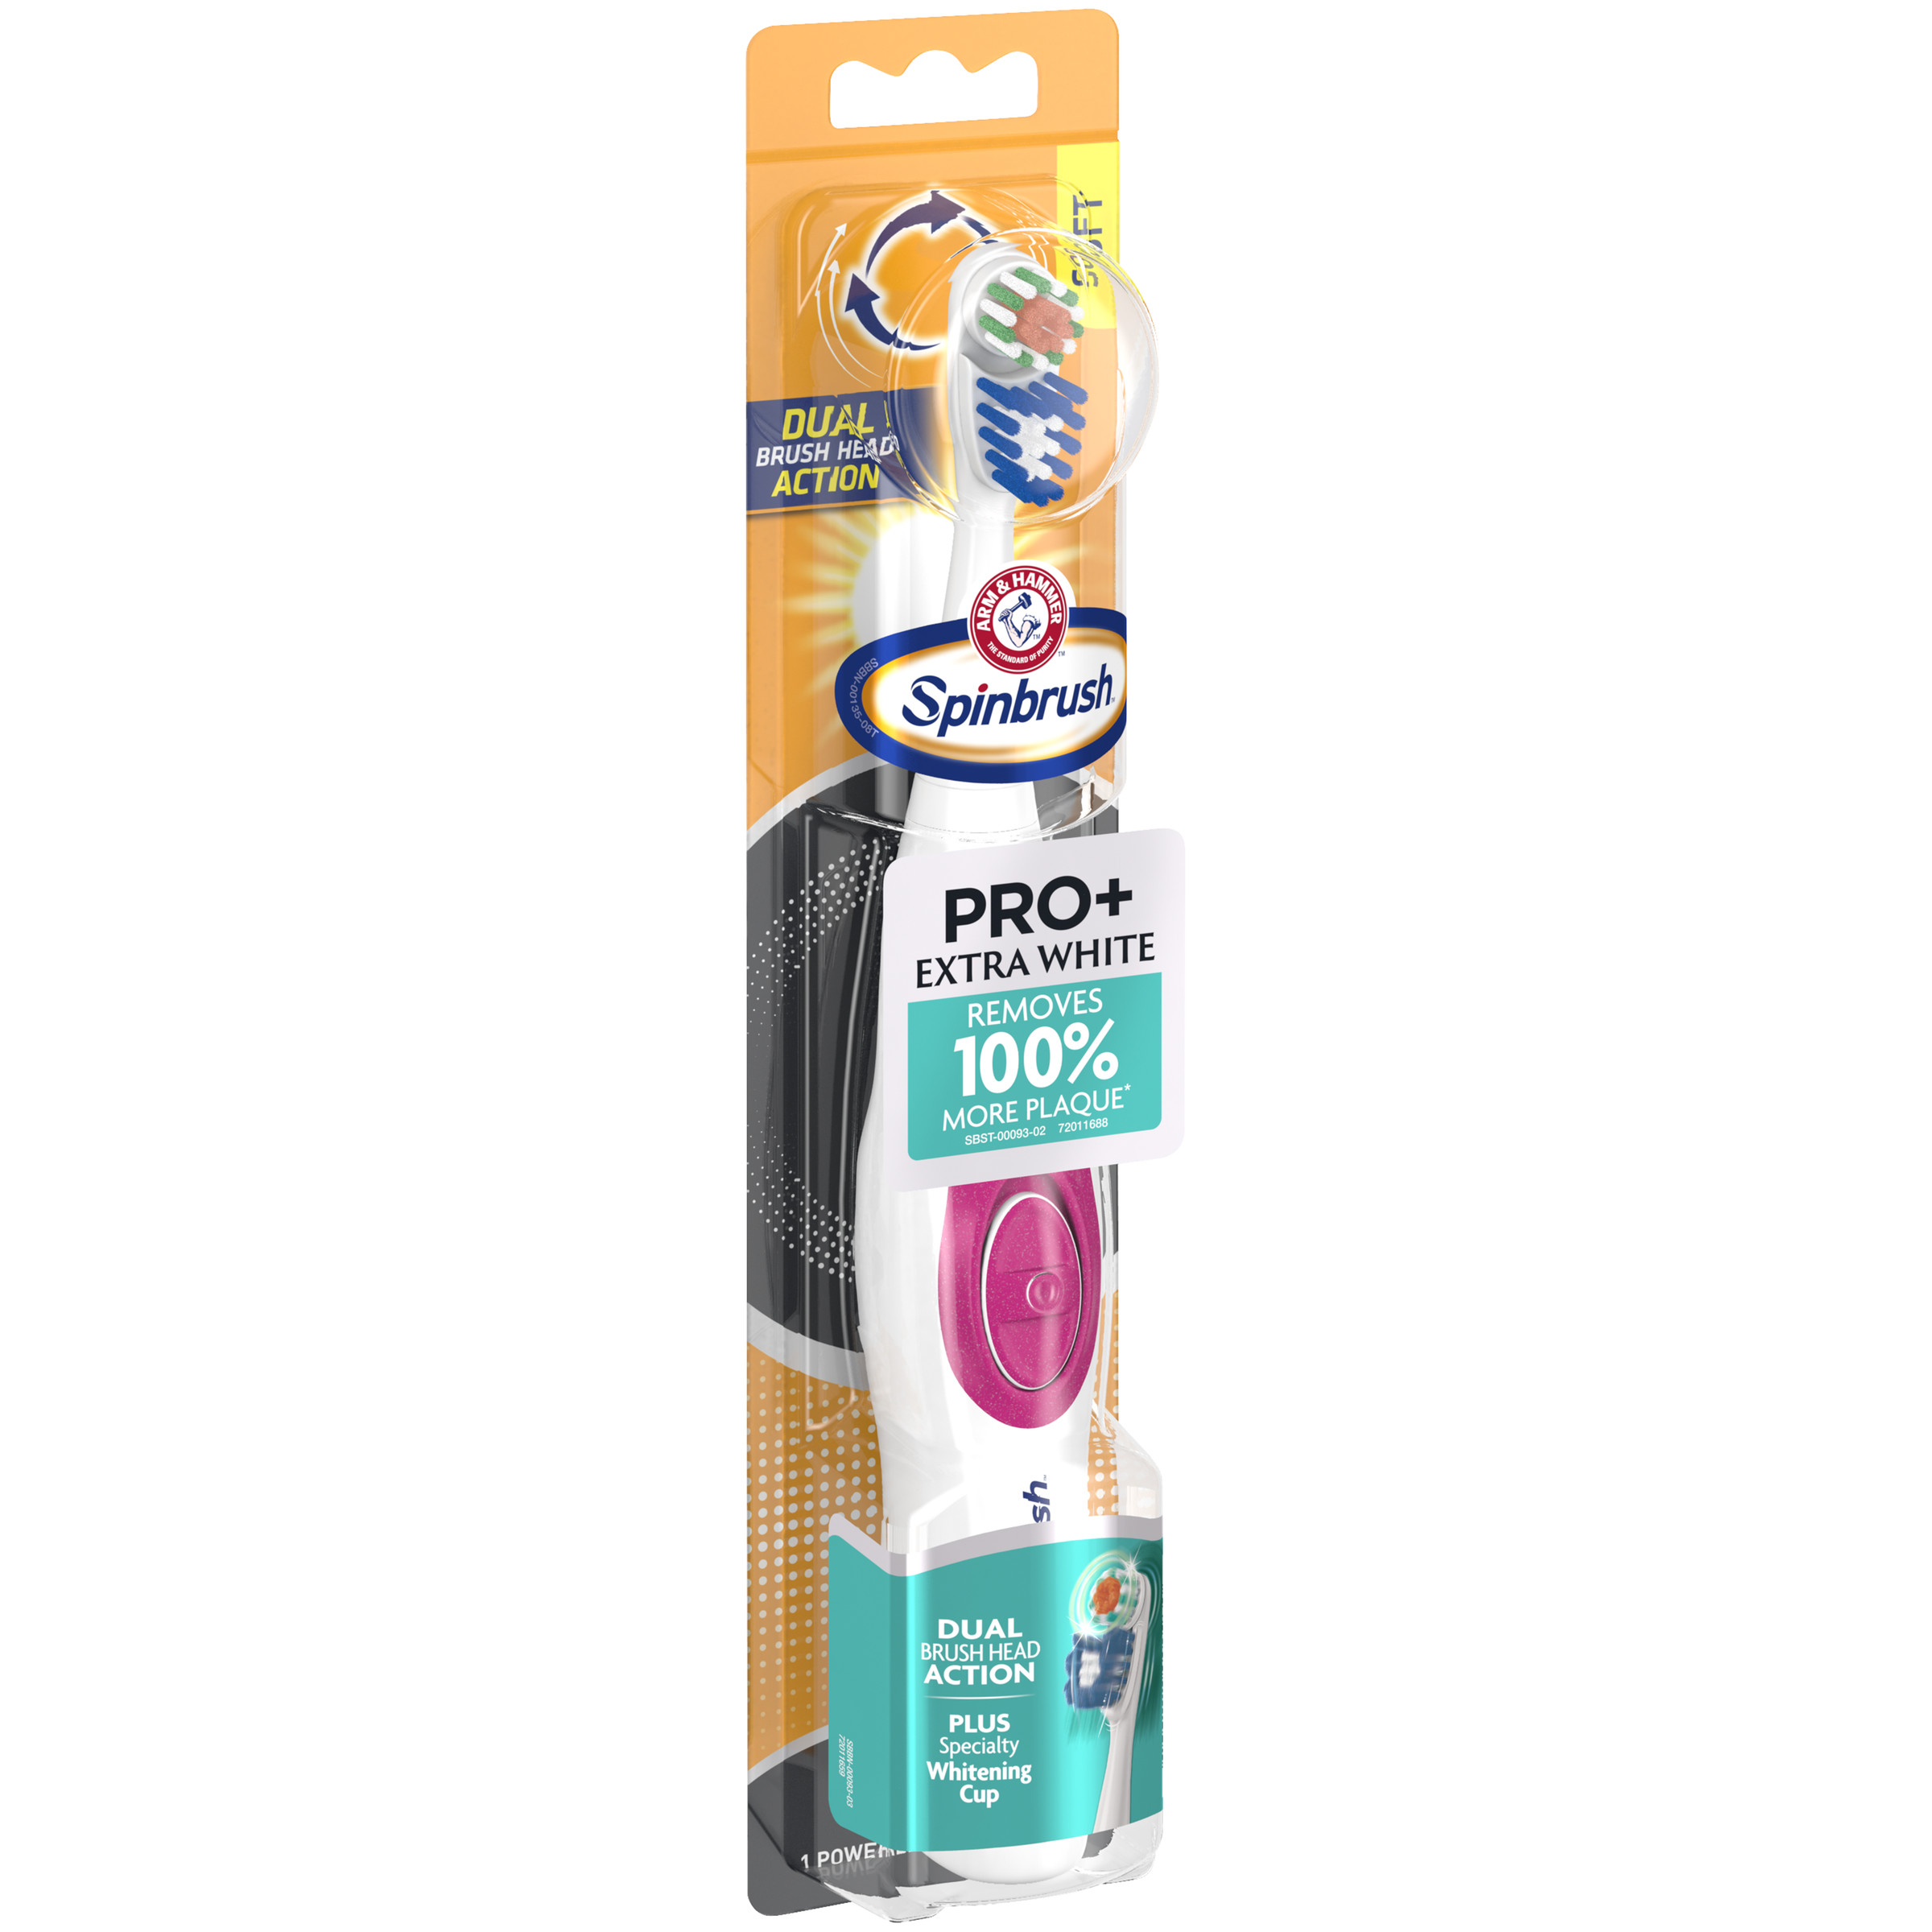 Spinbrush PRO+ Extra White Battery Powered Toothbrush for Adults, Soft Bristles with Whitening Cup - image 3 of 8